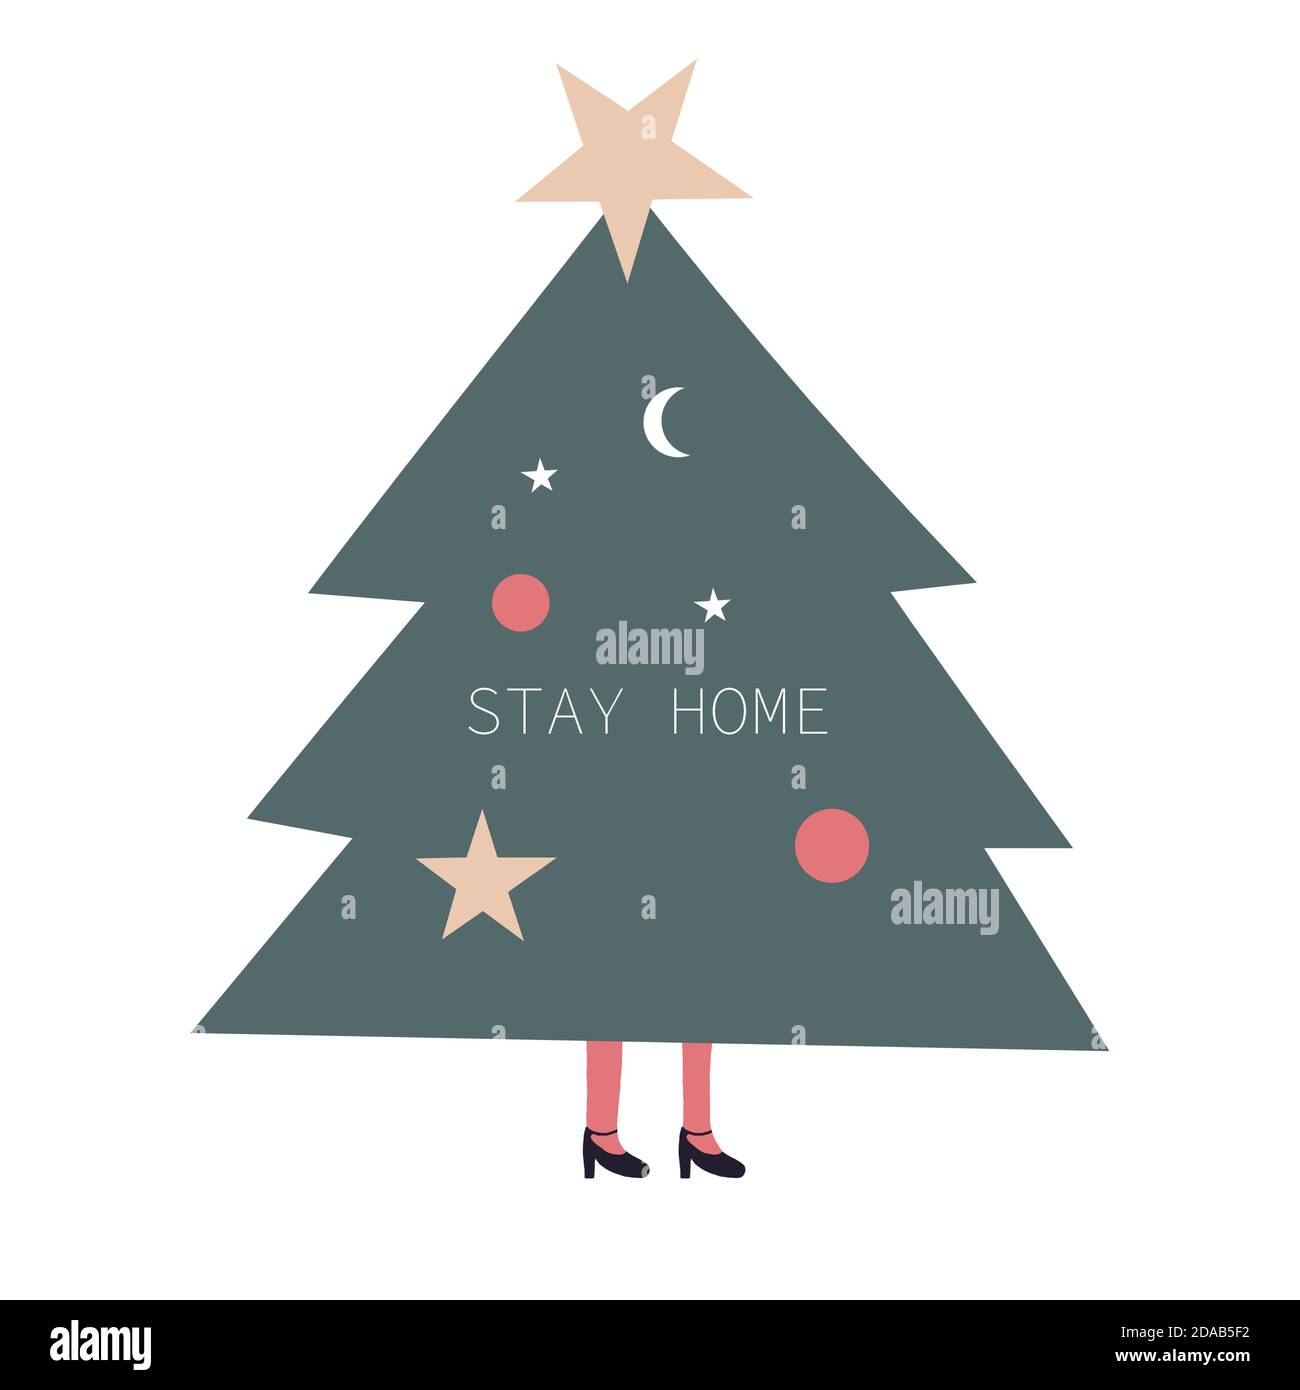 Funny Christmas Tree with golden star. Merry Christmas & Stay Home Stock Photo